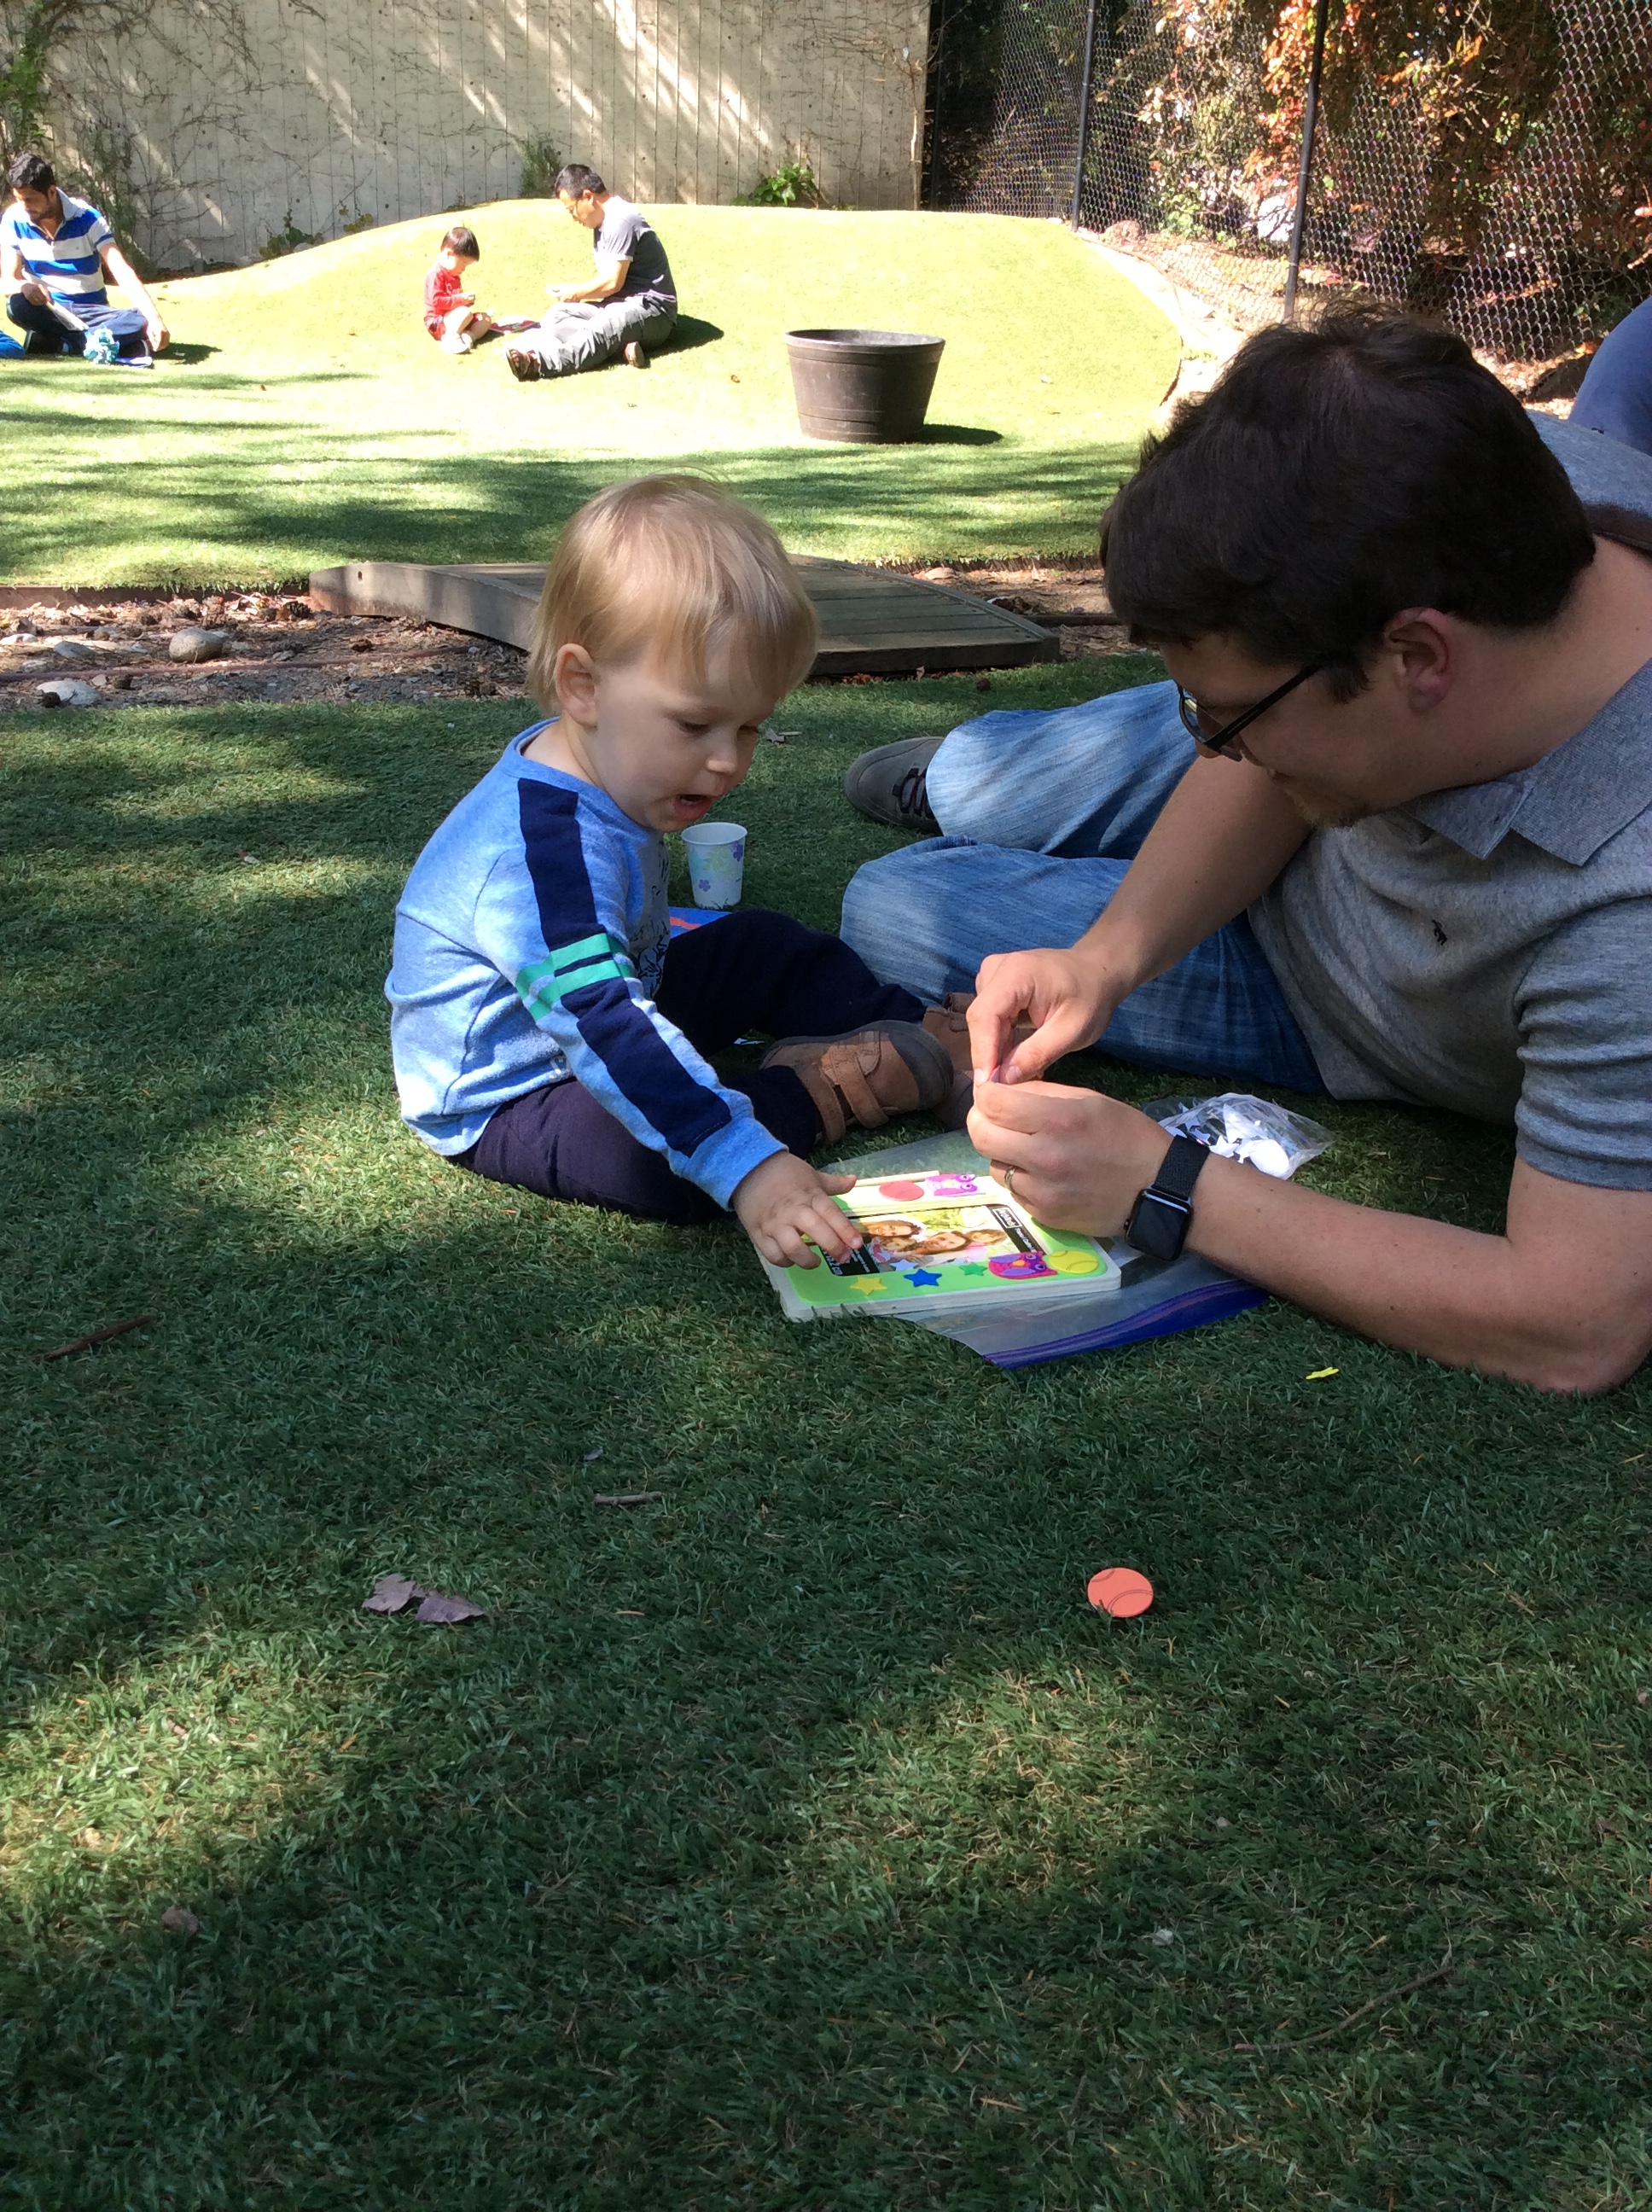 A loving father and his little boy are having fun sitting in the grass playing with stickers at the park.